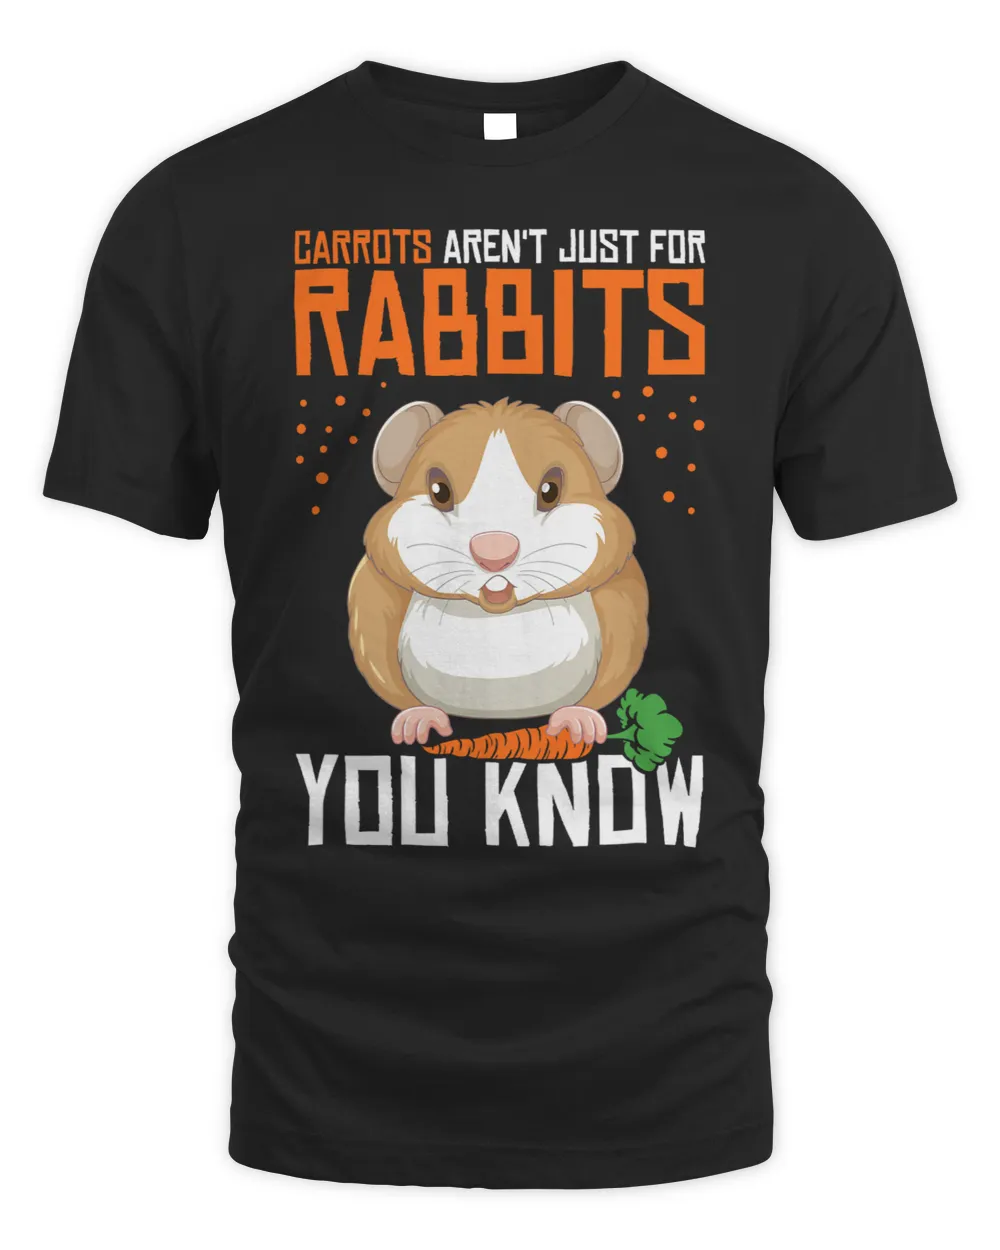 Carrots Arent Just For Rabbits Guinea Pig Guinea Lover